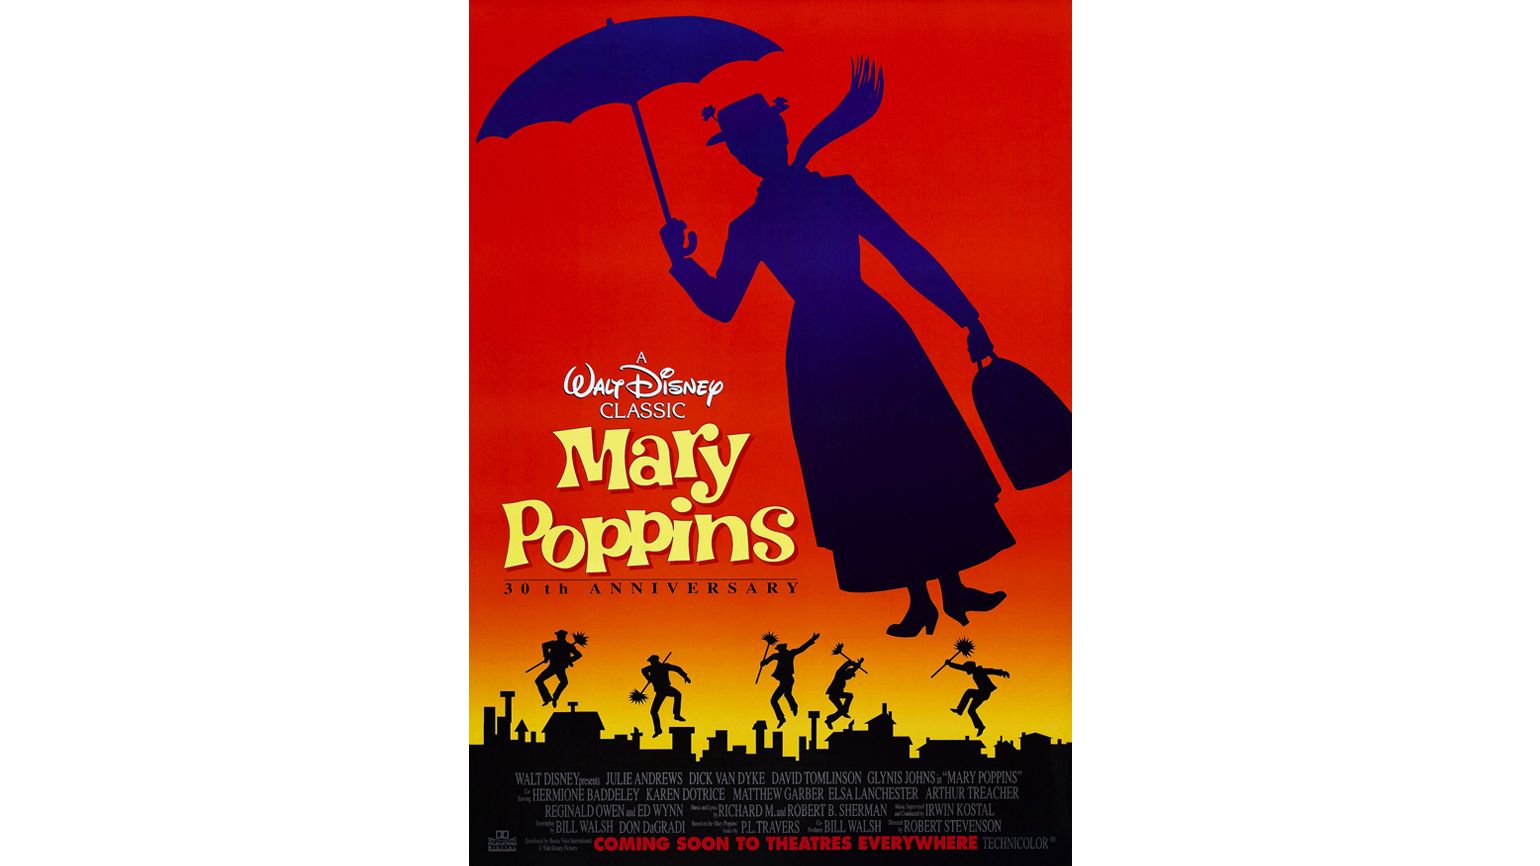 MARY POPPINS, US poster, 1964.